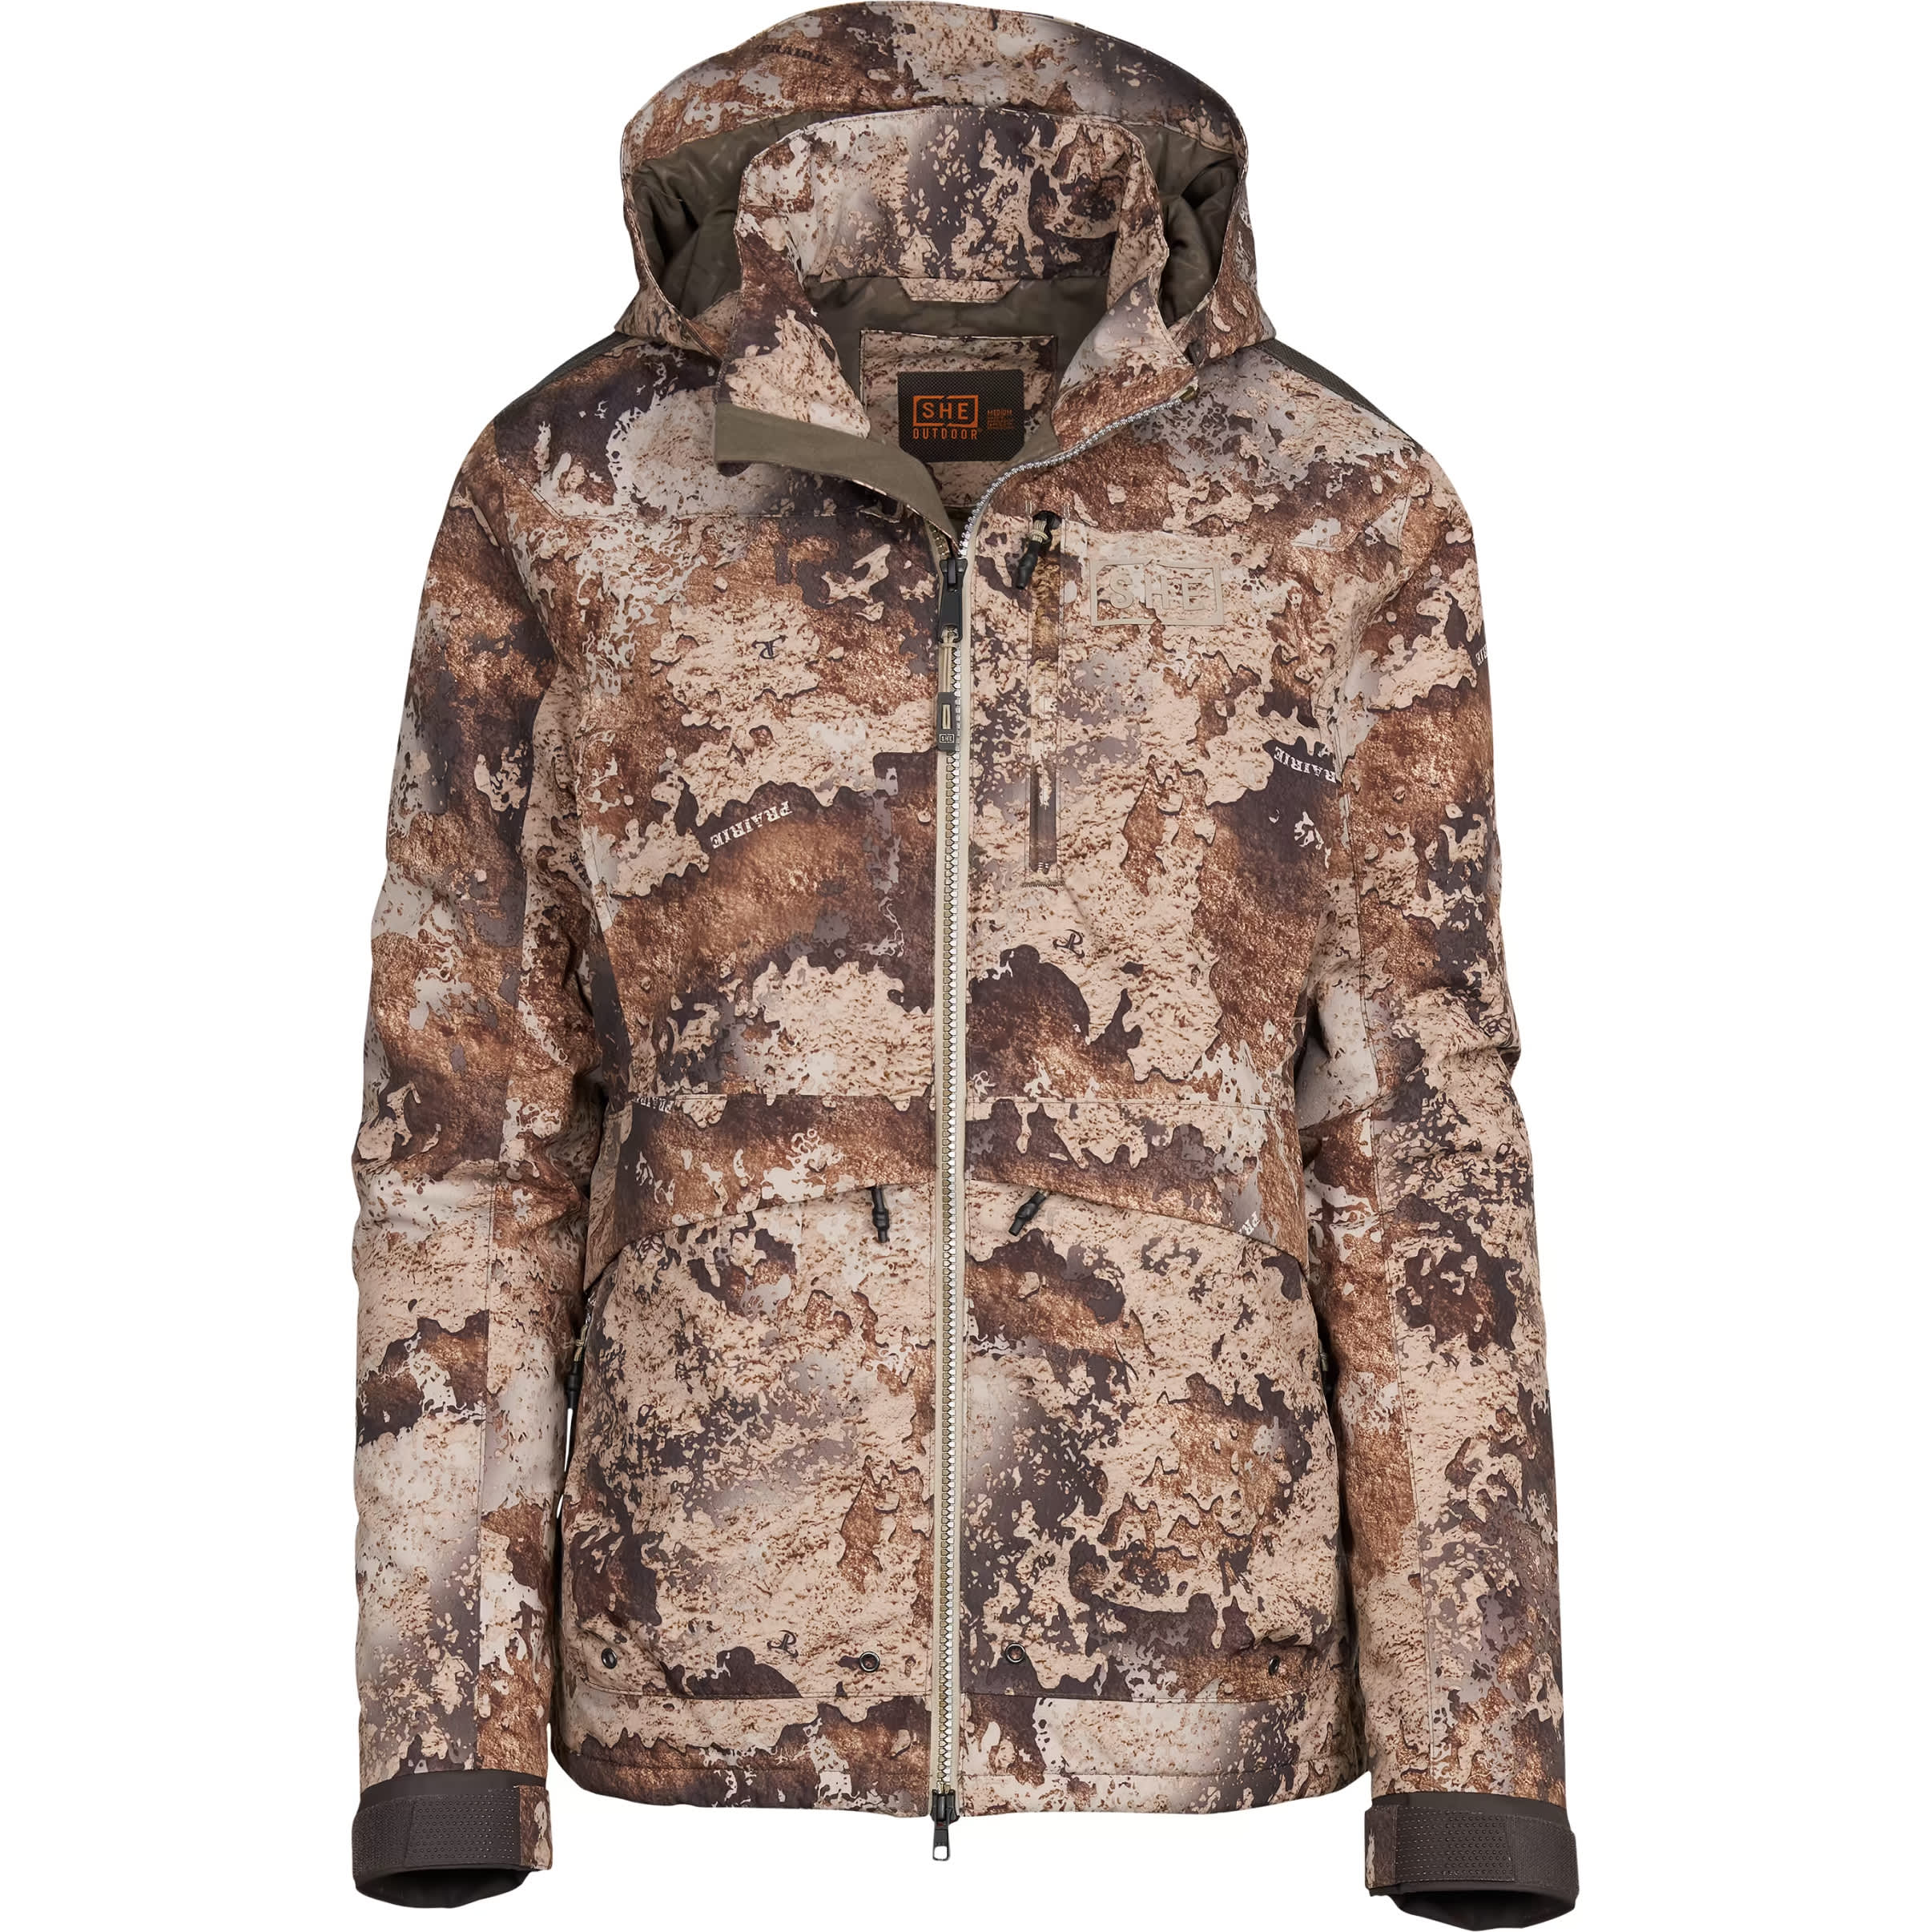 SHE Outdoor Women’s Confluence Insulated Waterfowl Jacket - Cabelas